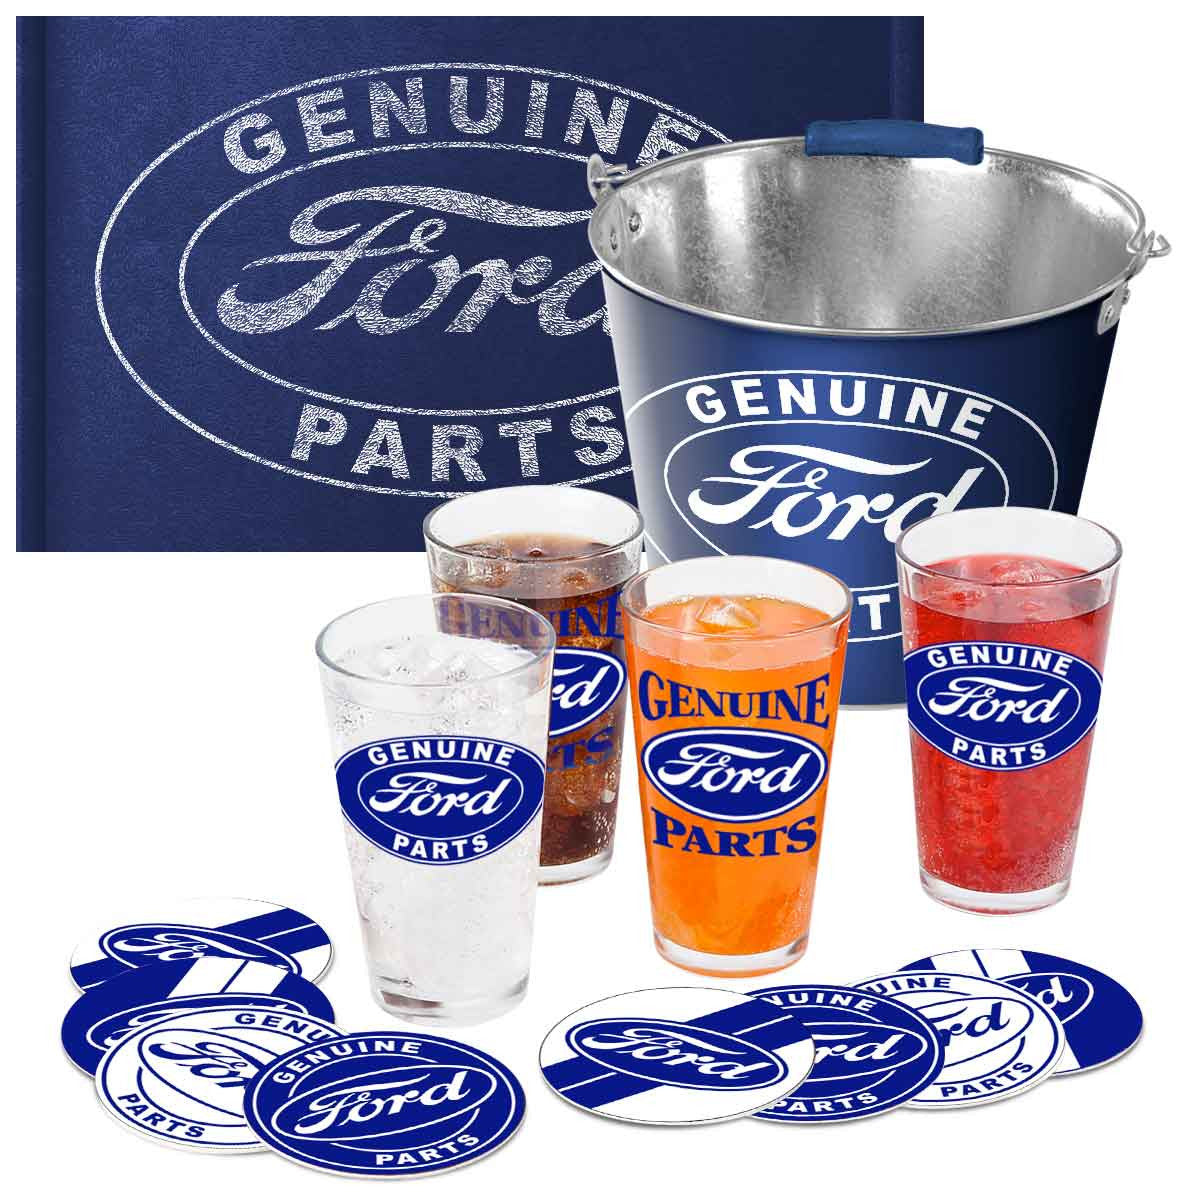 Pint Beer Glasses for Poker, Drinking Cups Set of 2 for Man Cave